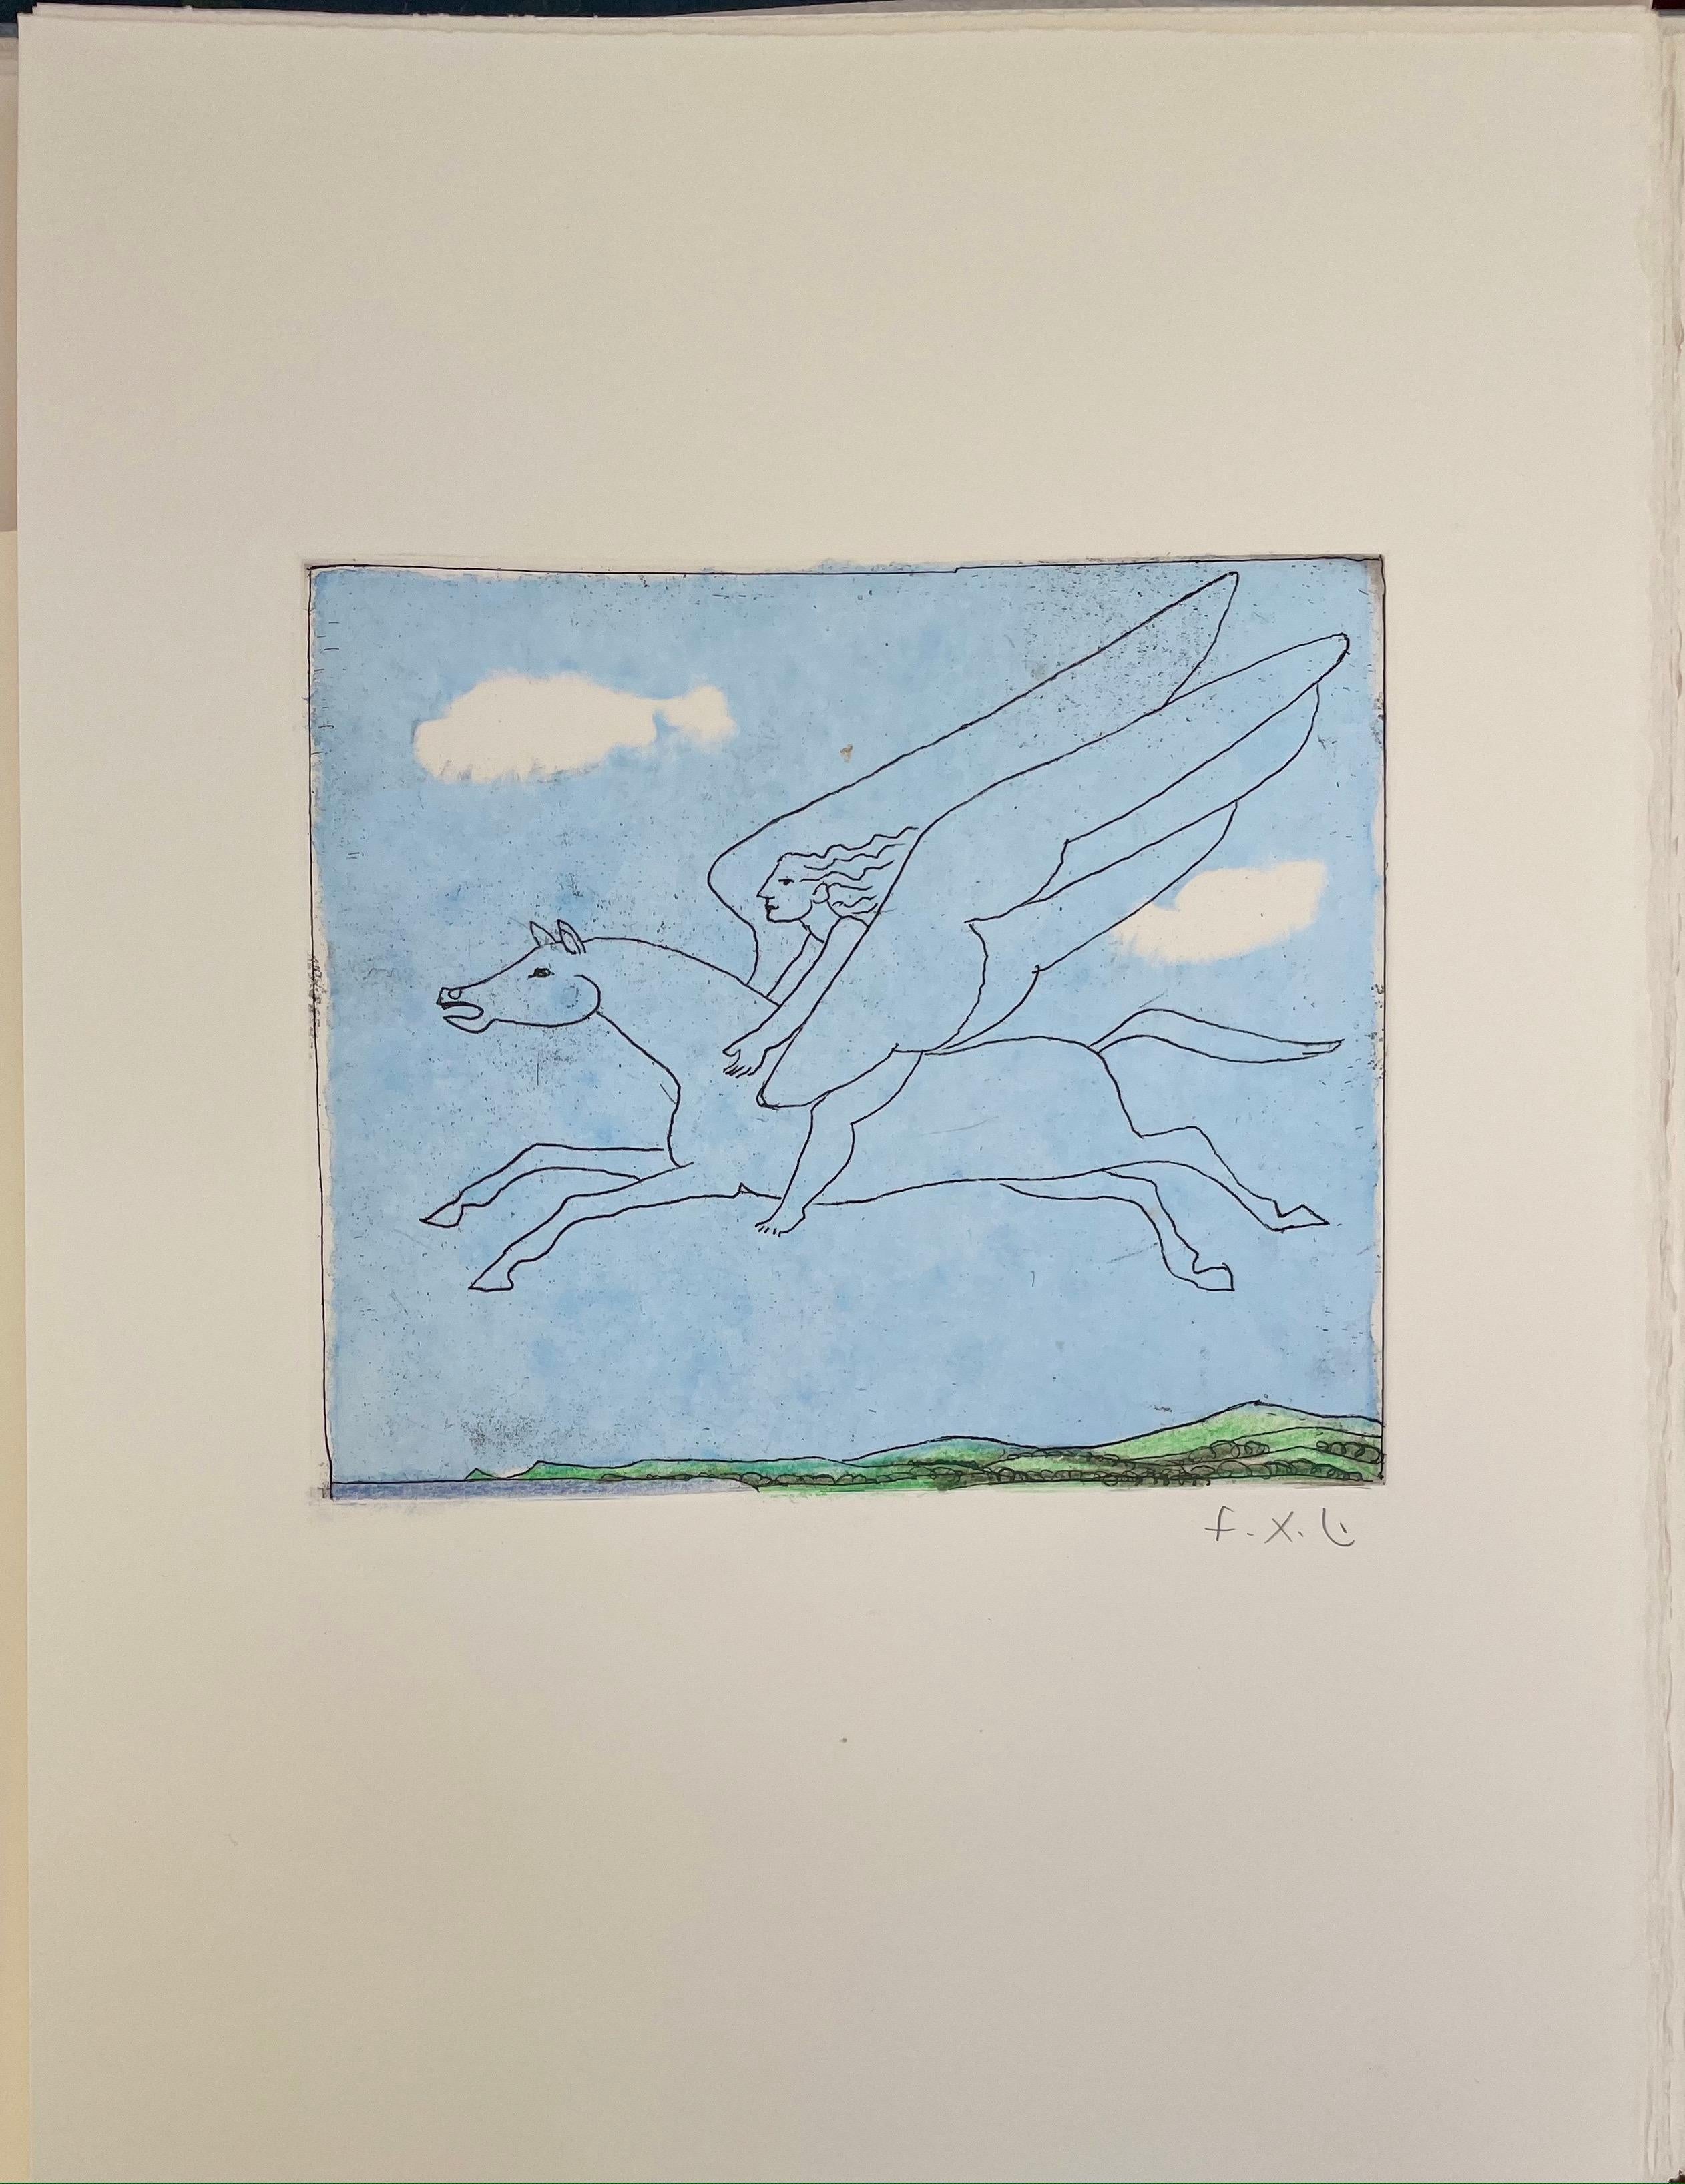 François-Xavier Lalanne (1927-2008) Pegasus, 2005 
Techniques : etching and soft varnish heightened with coloured pencil , hand signed in pencil by François Xavier Lalanne, in perfect condition 
Dimensions of the paper : 38 x 28 cm (14,96 x 11